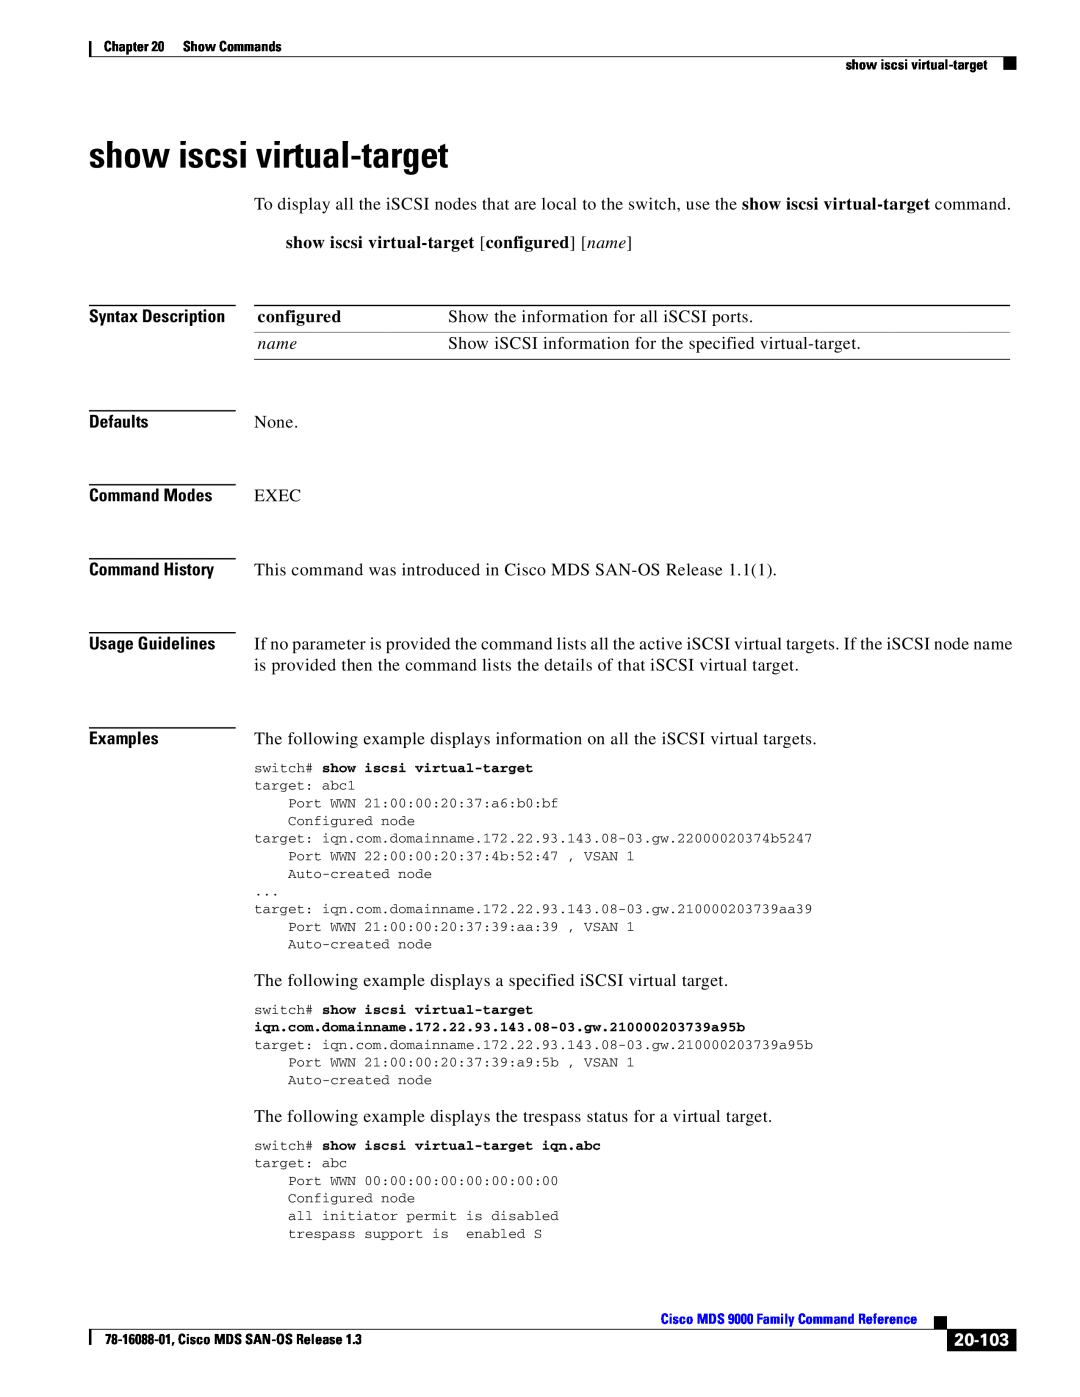 Cisco Systems MDS 9000 manual show iscsi virtual-target configured name, 20-103, Usage Guidelines Examples 